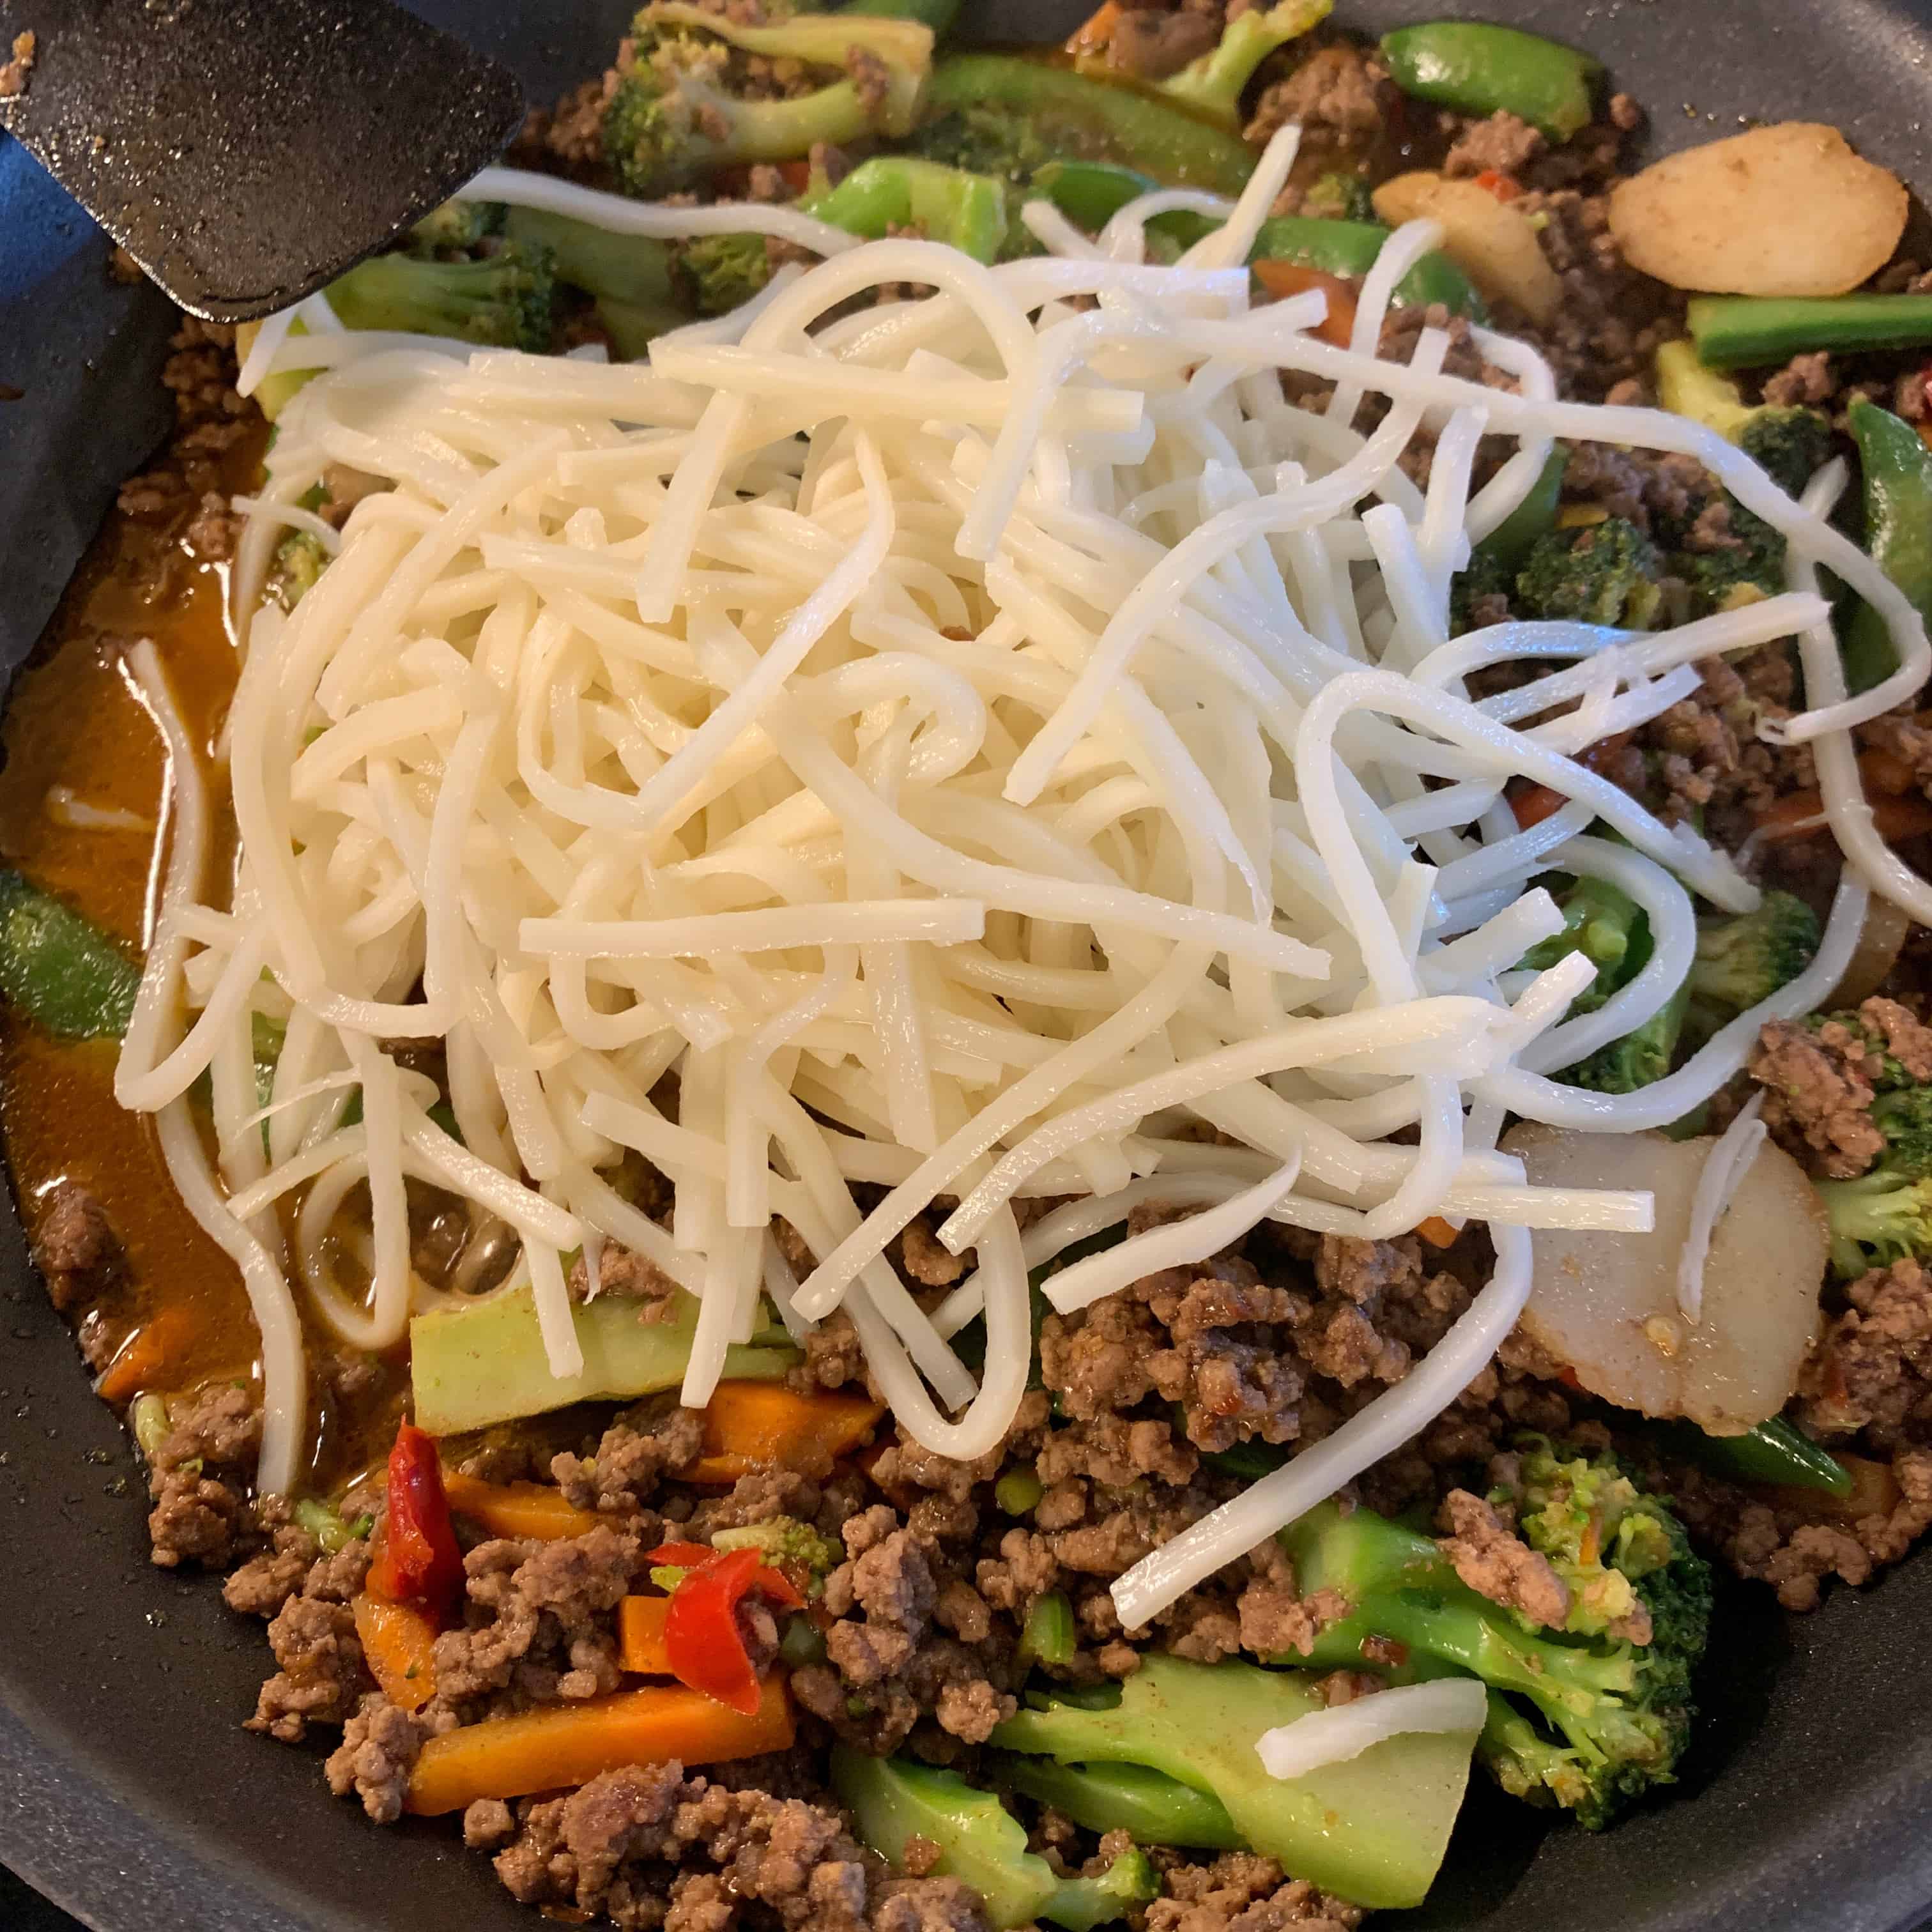 the vegetables and noodles on top of the cooked ground beef and five spice sauce